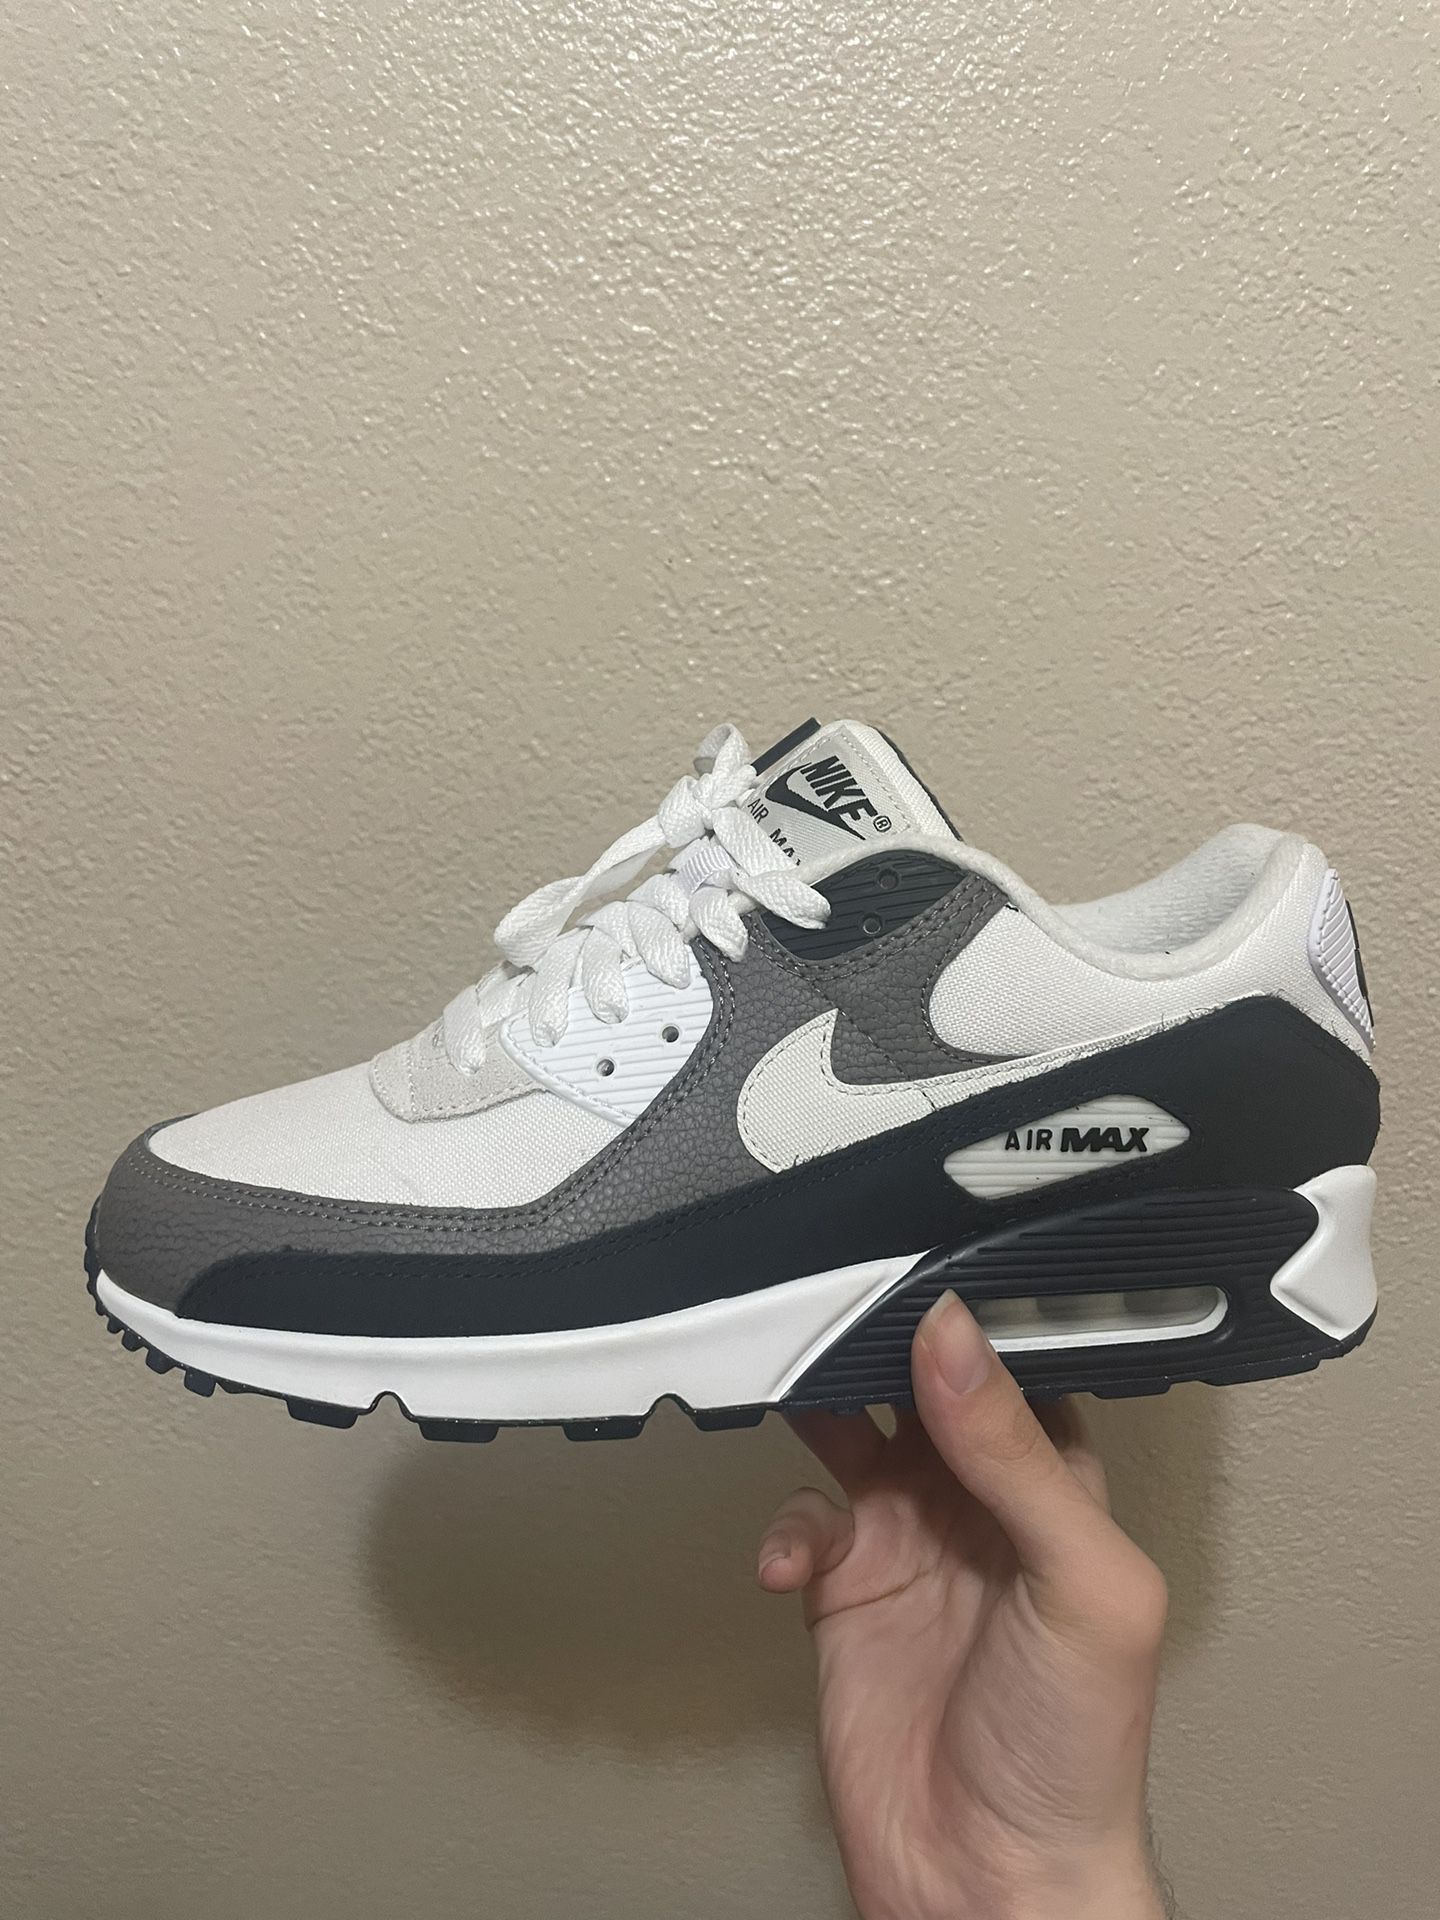 NIKE AIR MAX 90 REVERSE DUCK CAMO (2020) for Sale in Carson, CA - OfferUp